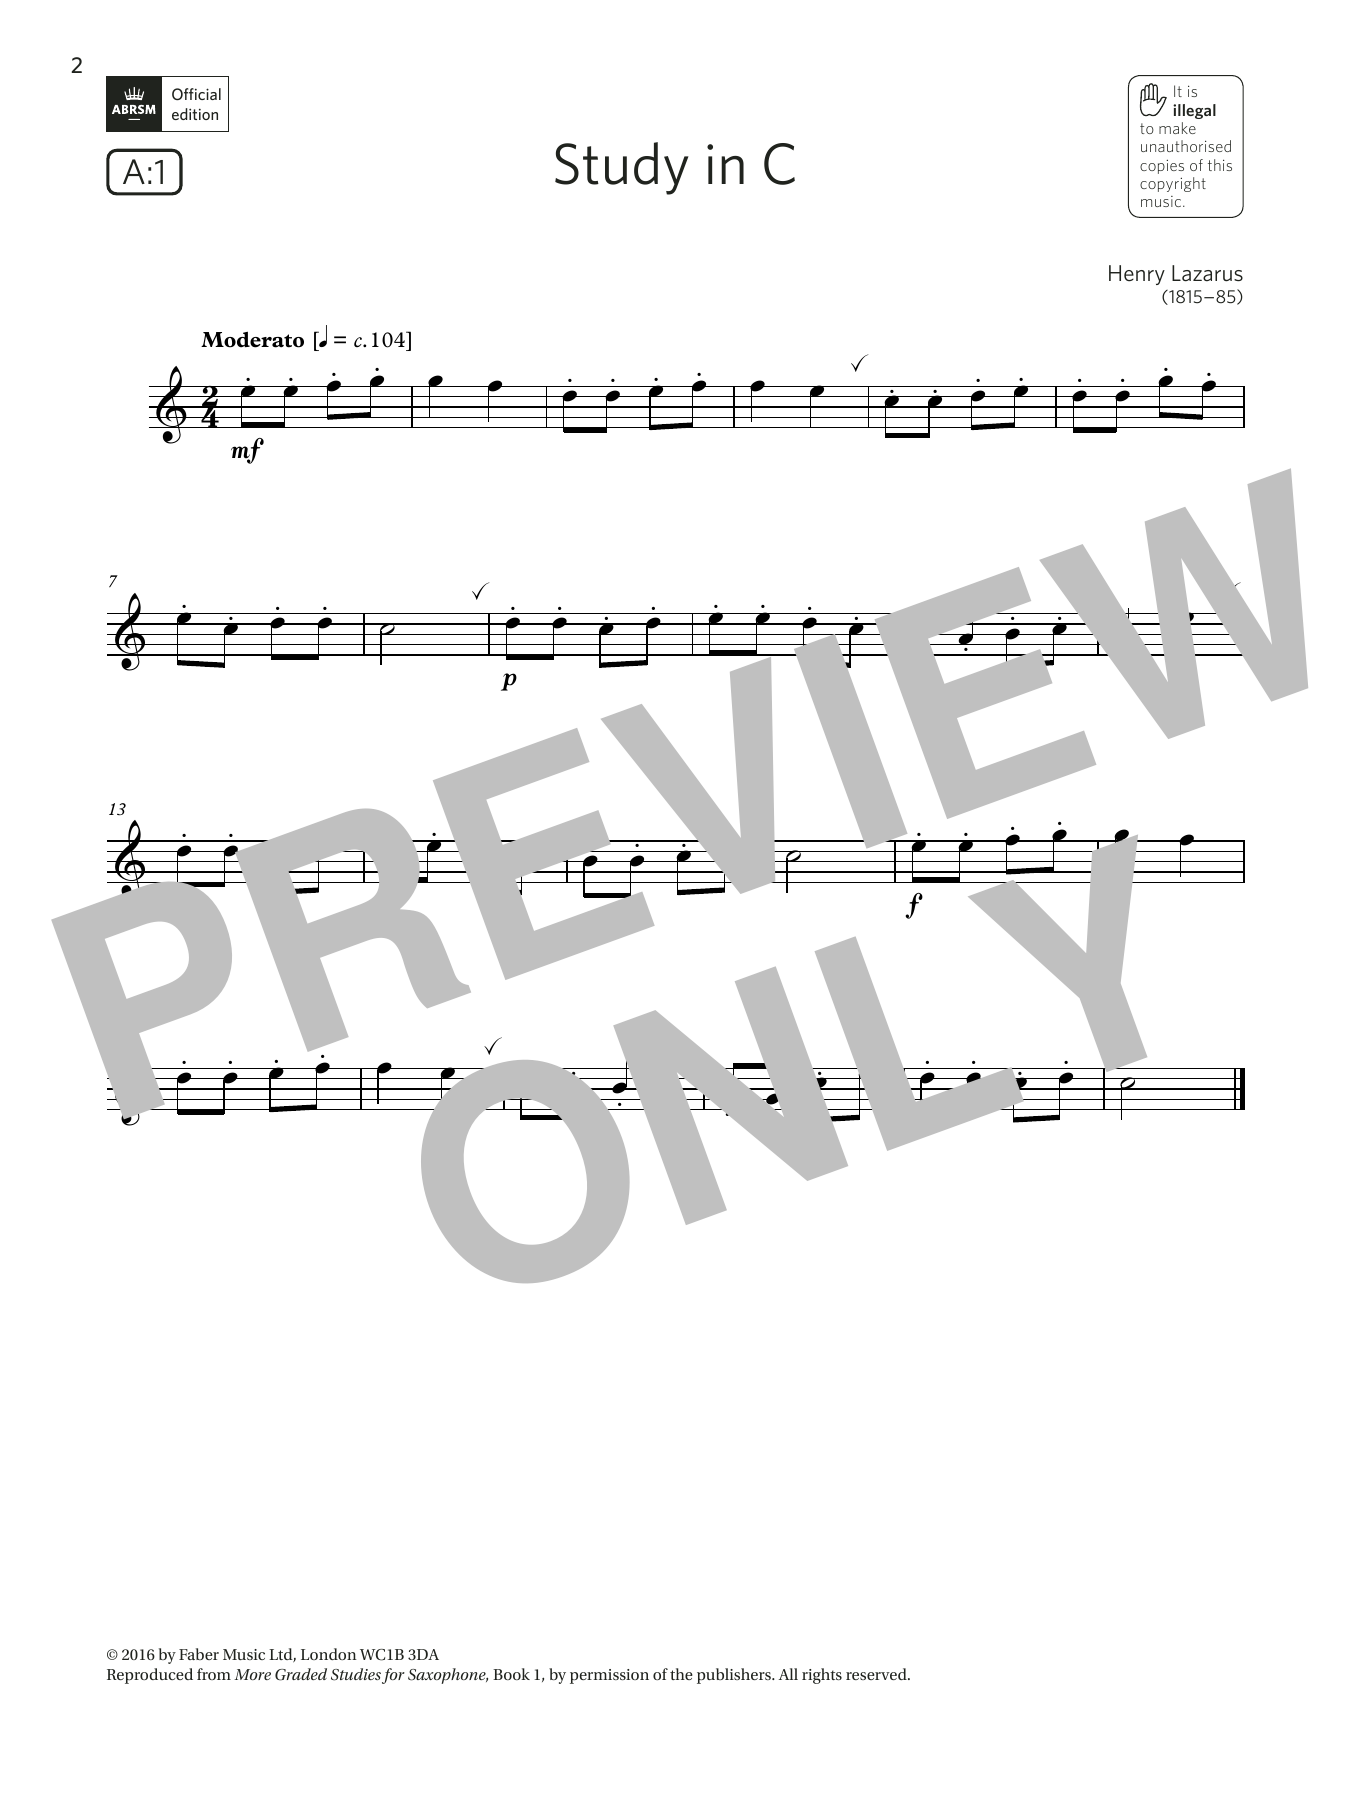 Download Henry Lazarus Study in C (Grade 1 List A1 from the AB Sheet Music